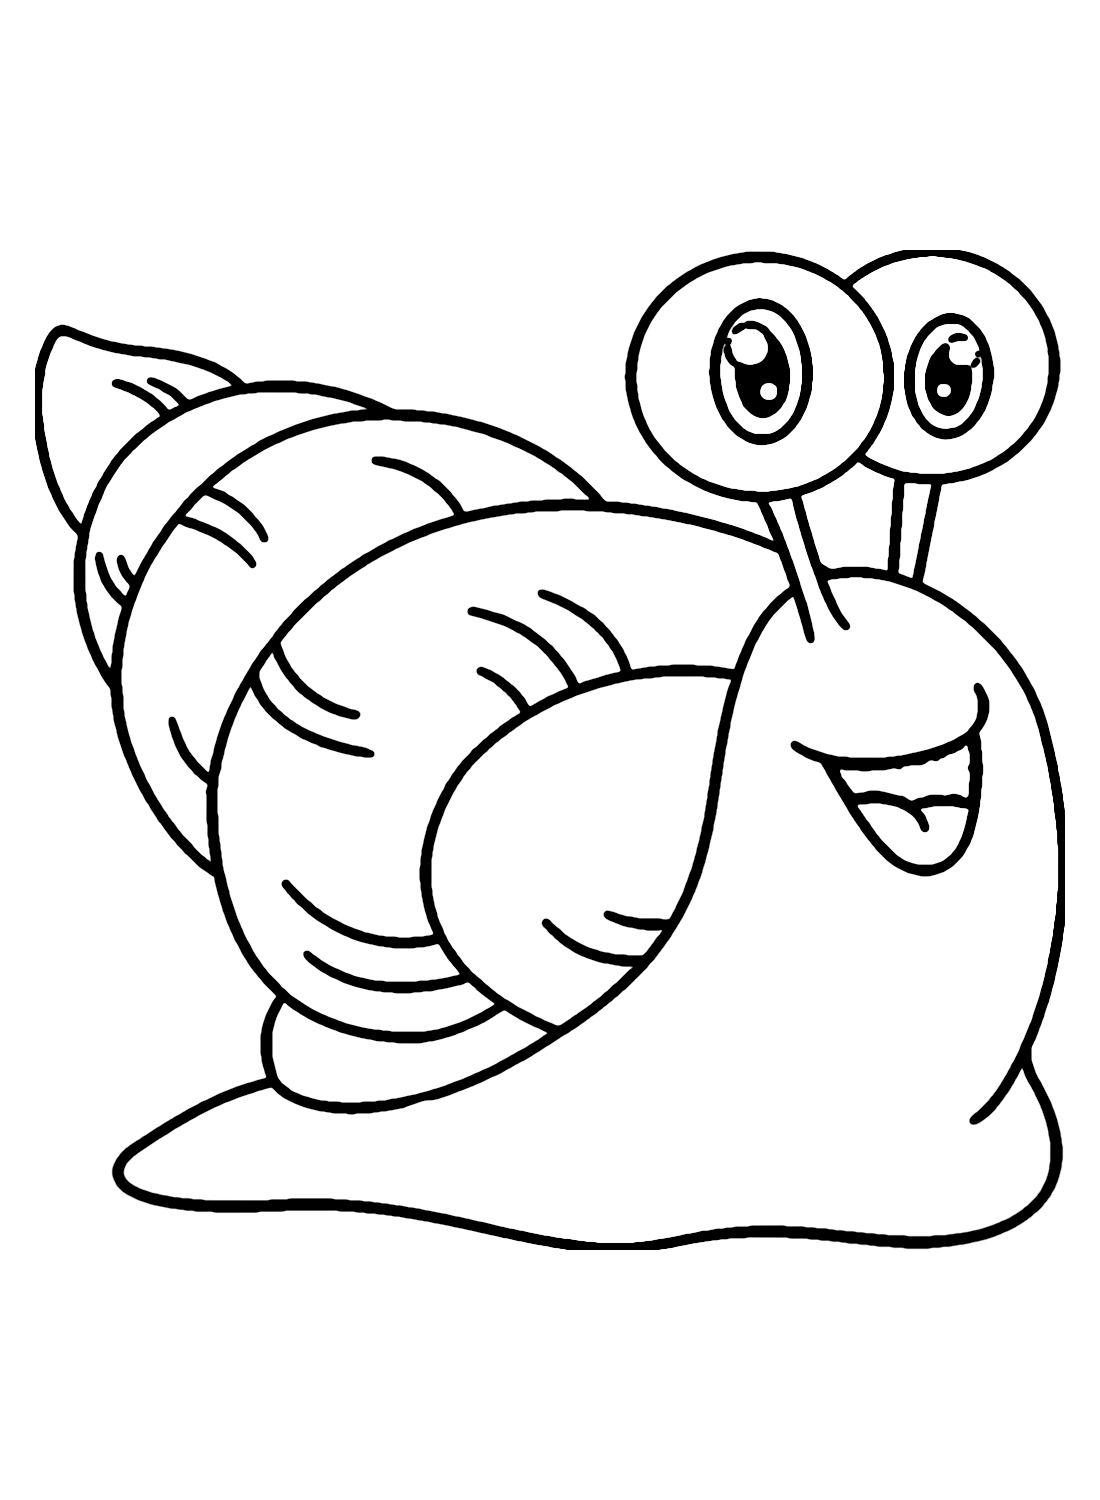 Images Sea Snail Coloring Page